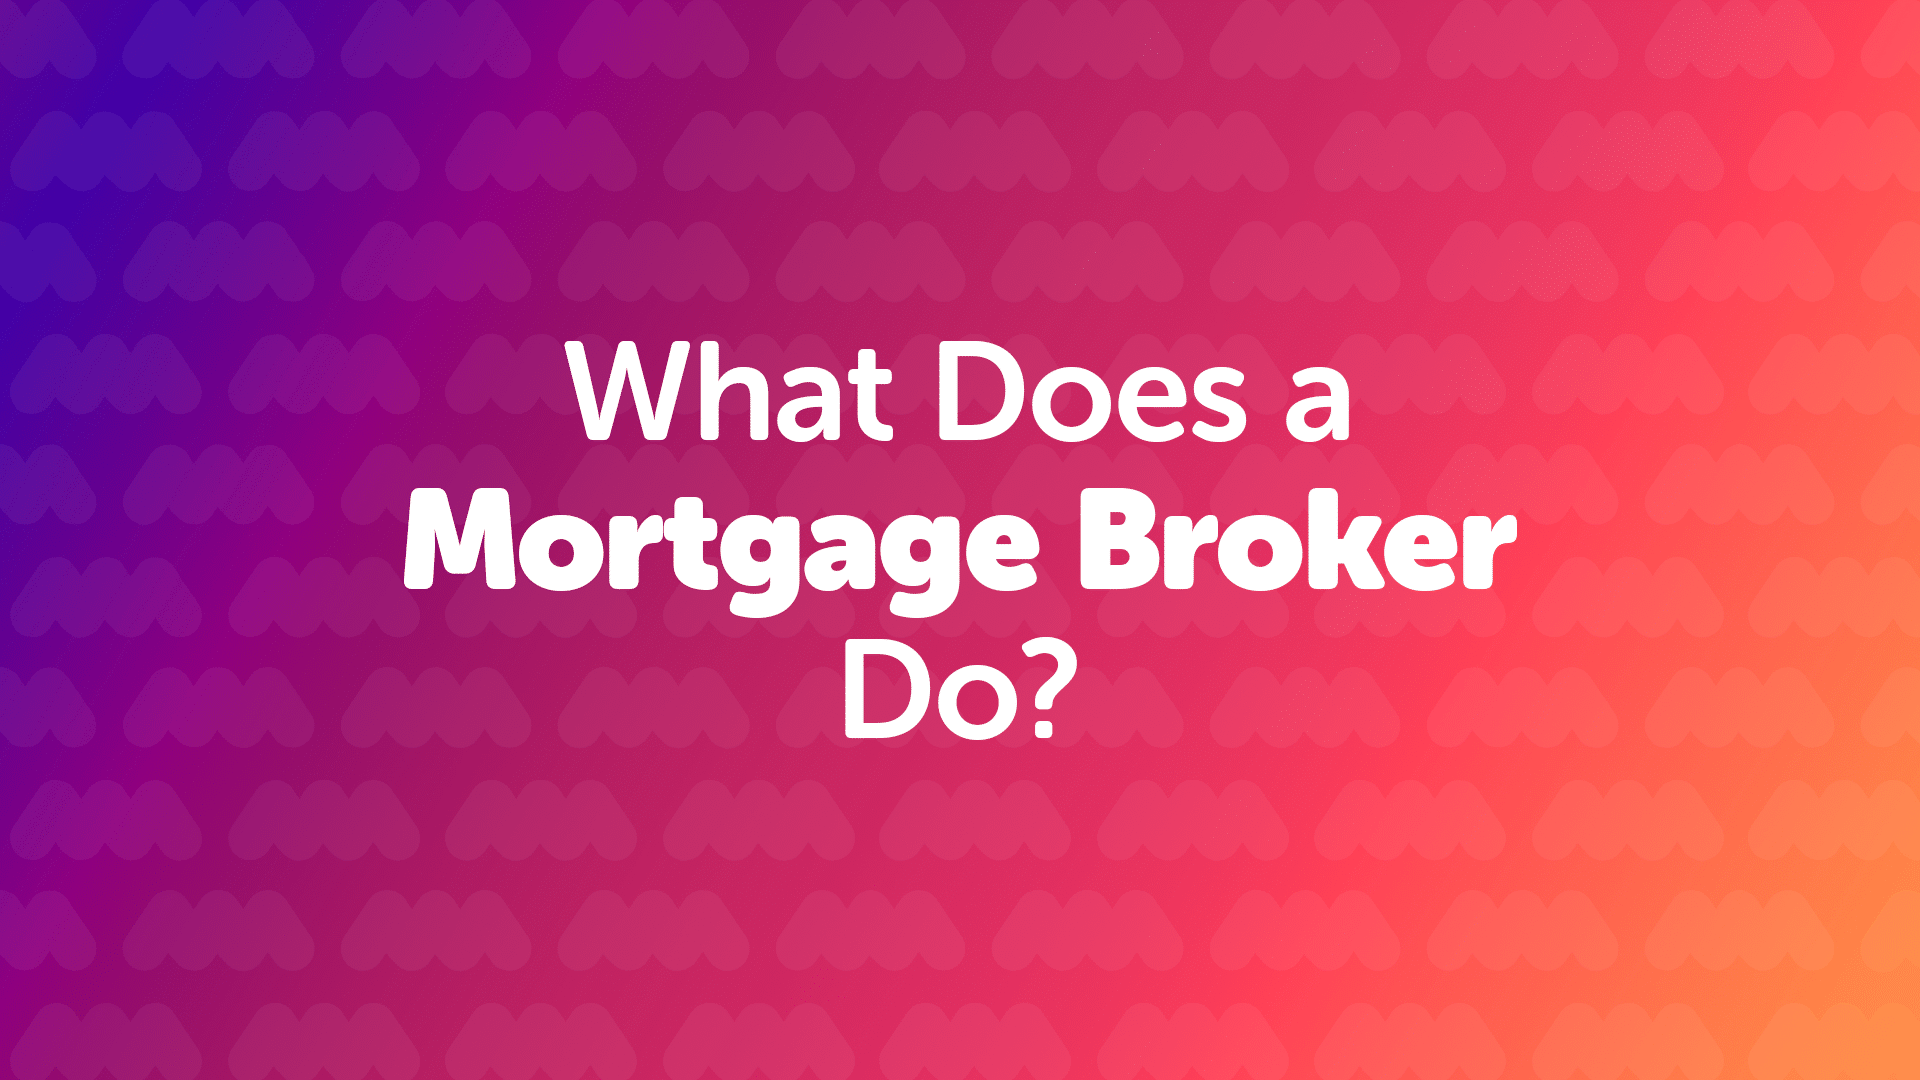 What Does a Mortgage Broker in Bristol do?